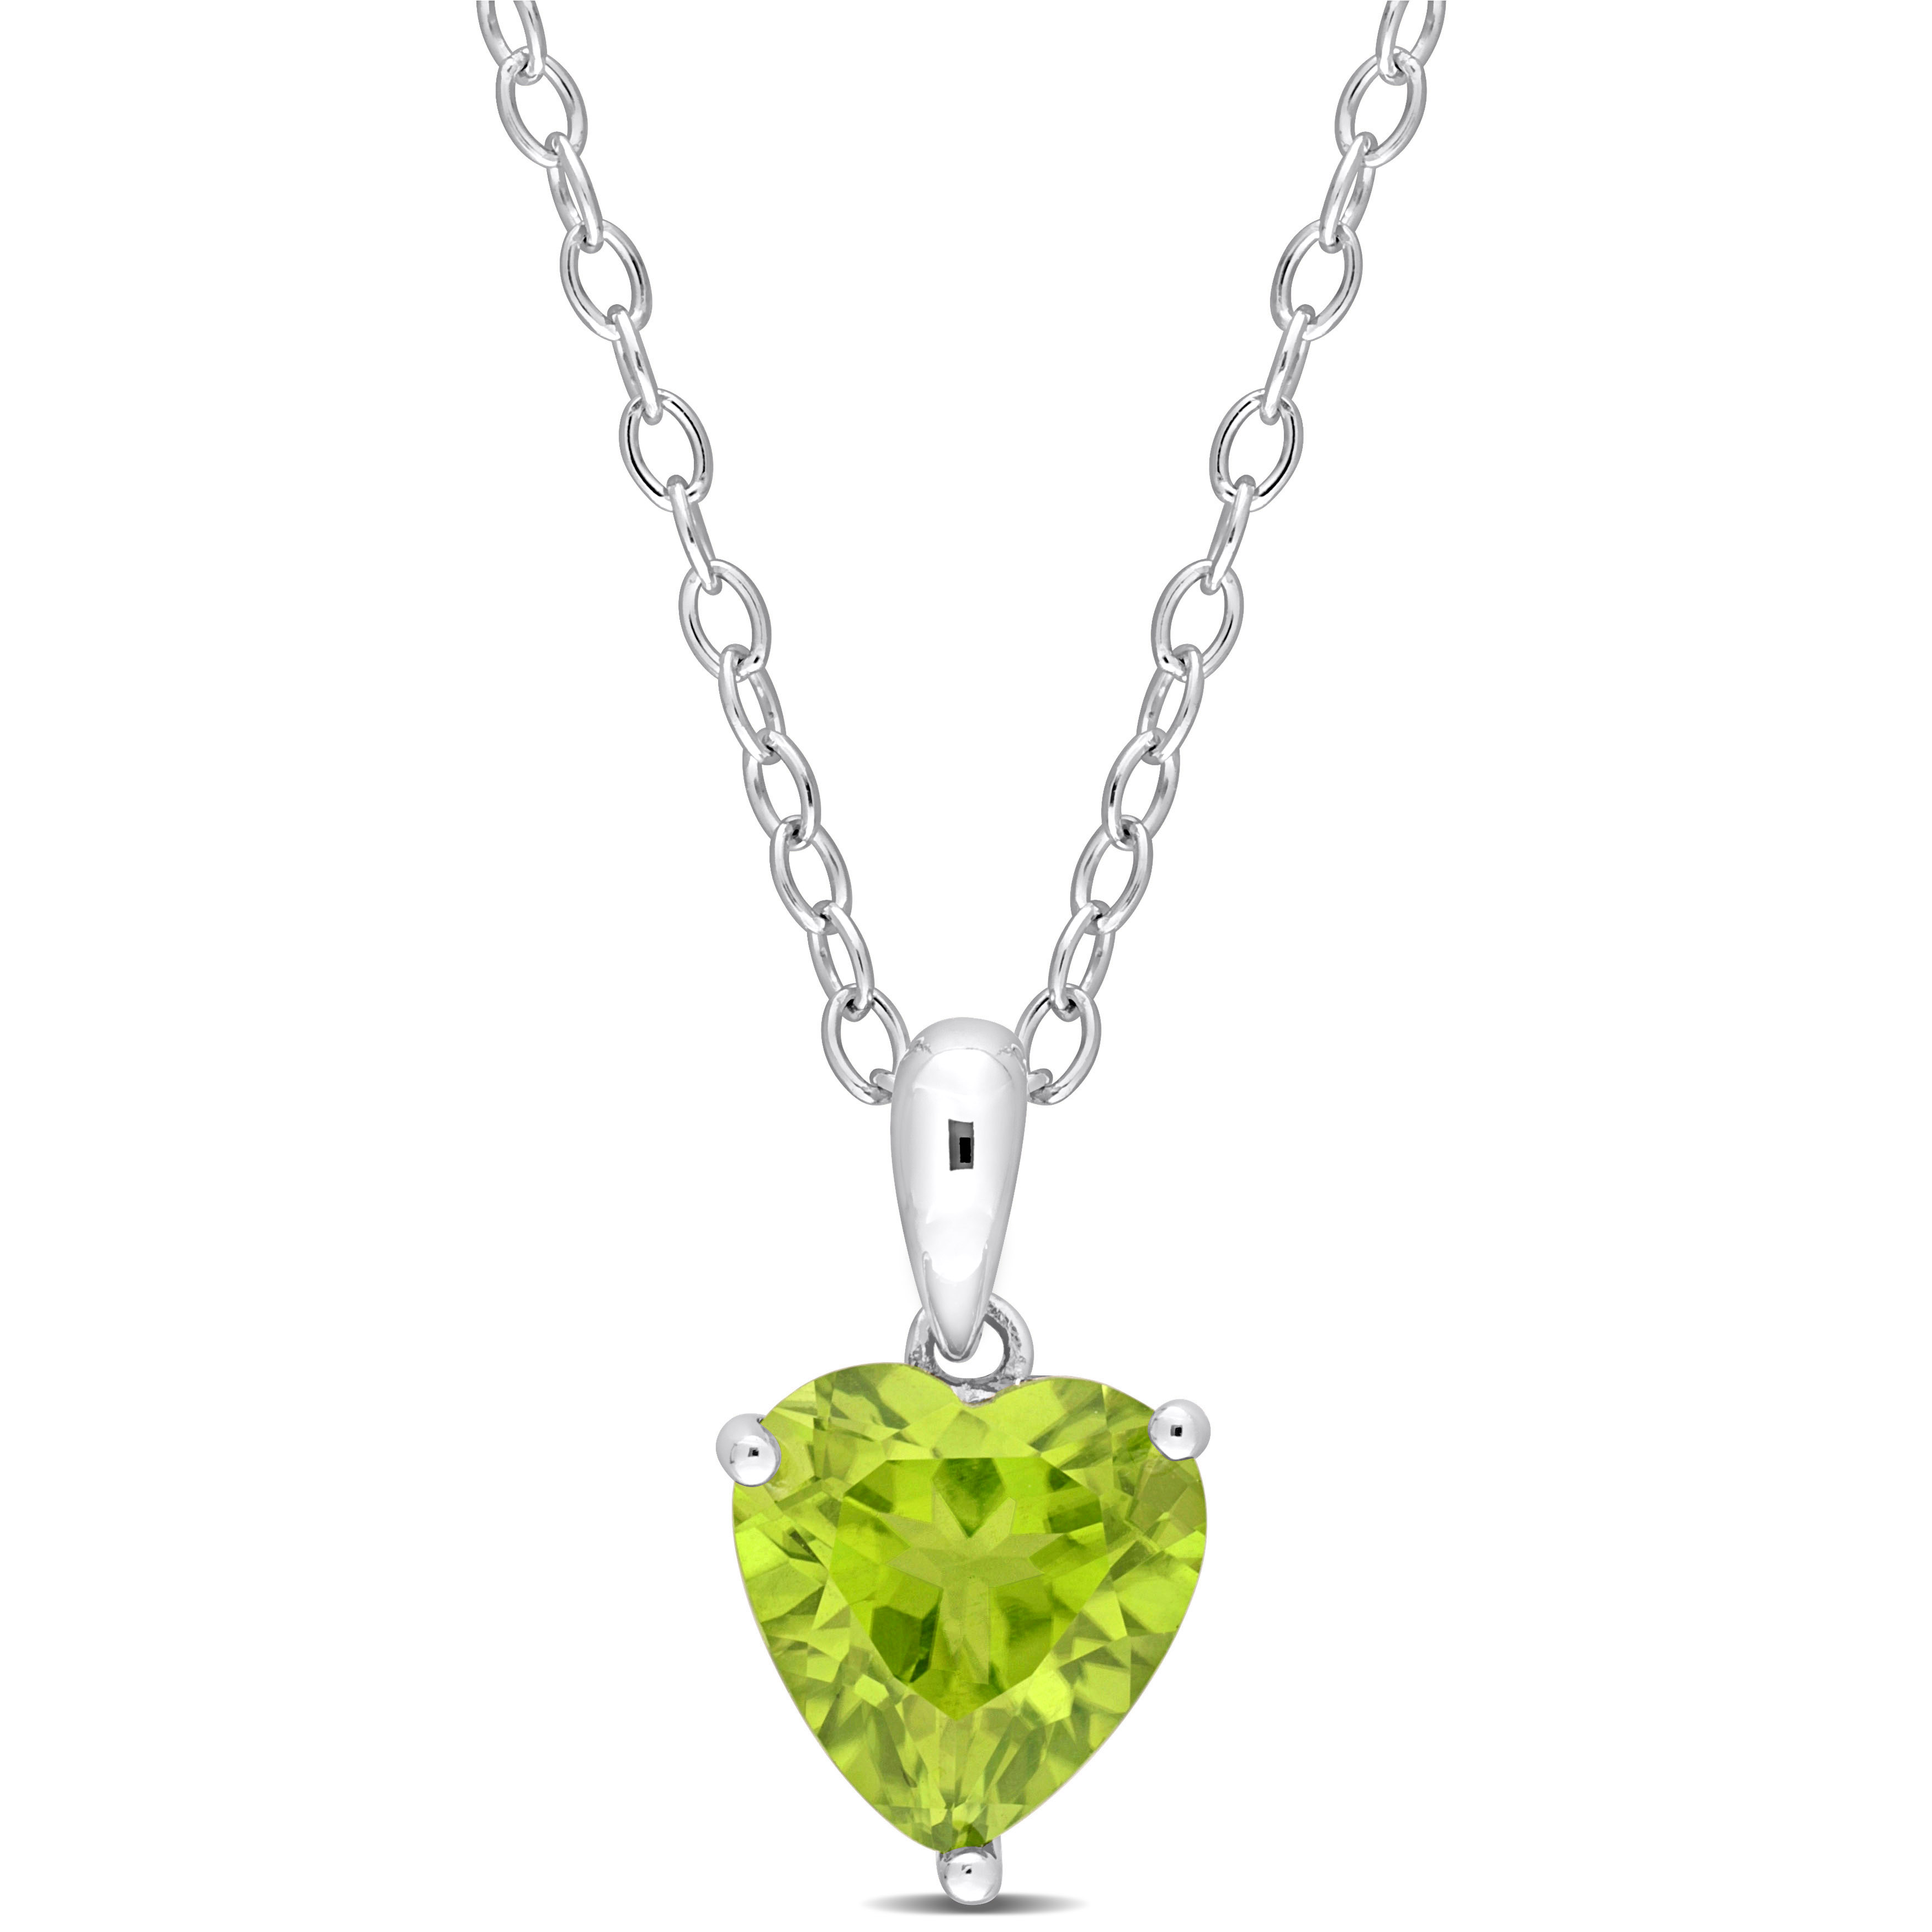 1 5/8 CT TGW Heart Shape Peridot Solitaire Heart Design Pendant with Chain in Sterling Silver - 18 in.